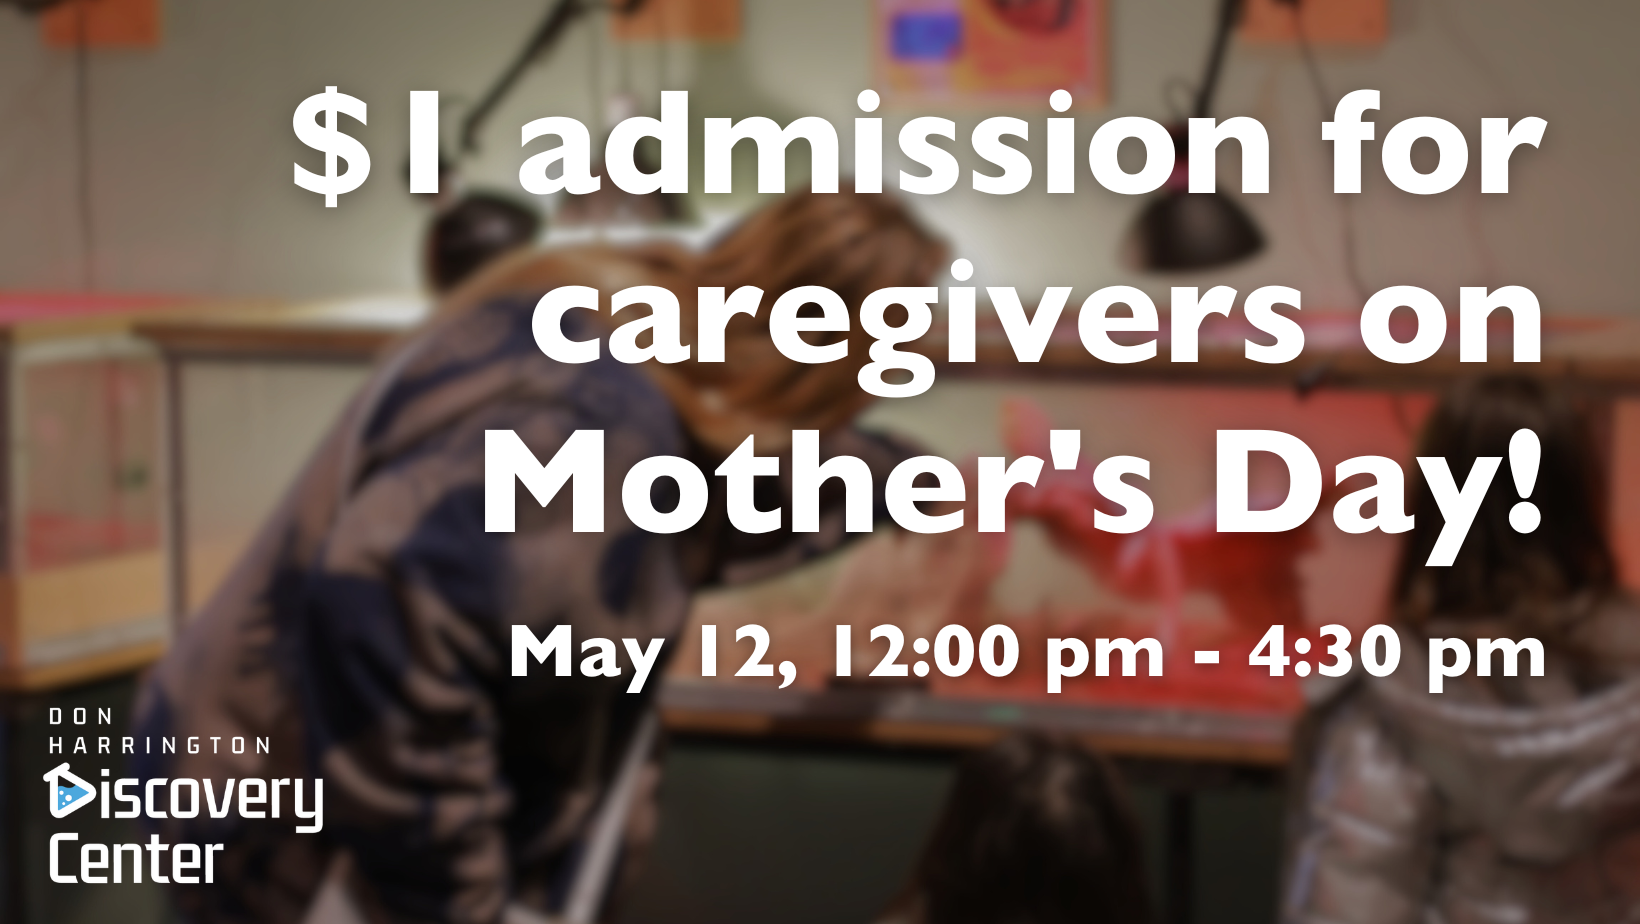 Mother's Day at DHDC